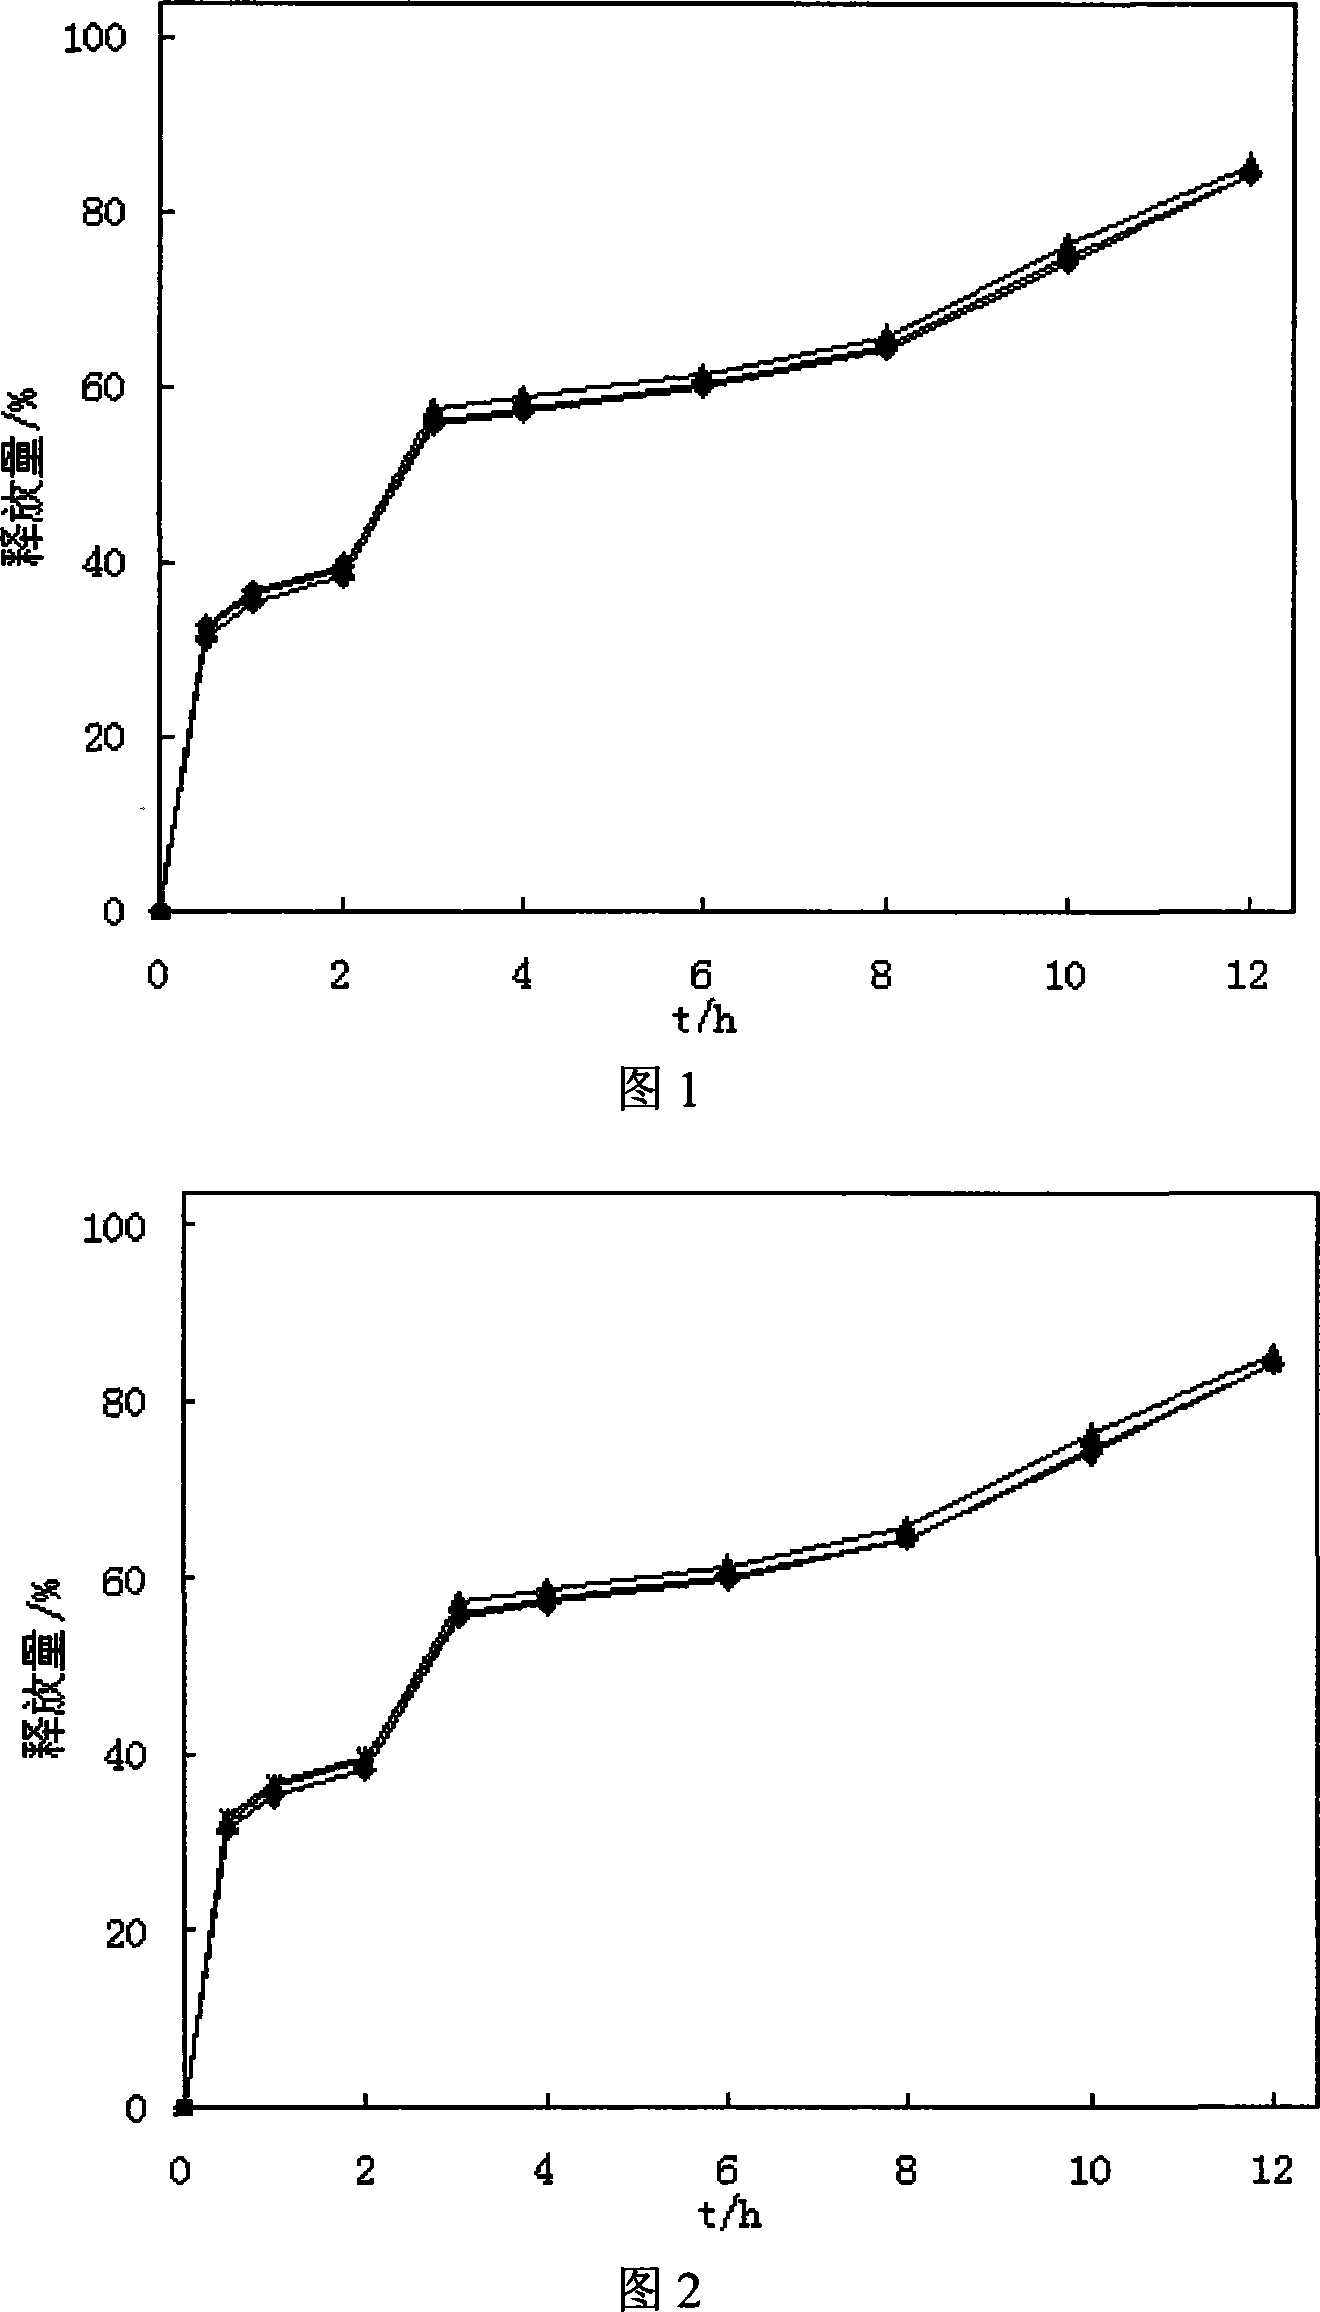 Composition of slow (controled) releasing preparation of Quetiadine Hemifumarate, and application